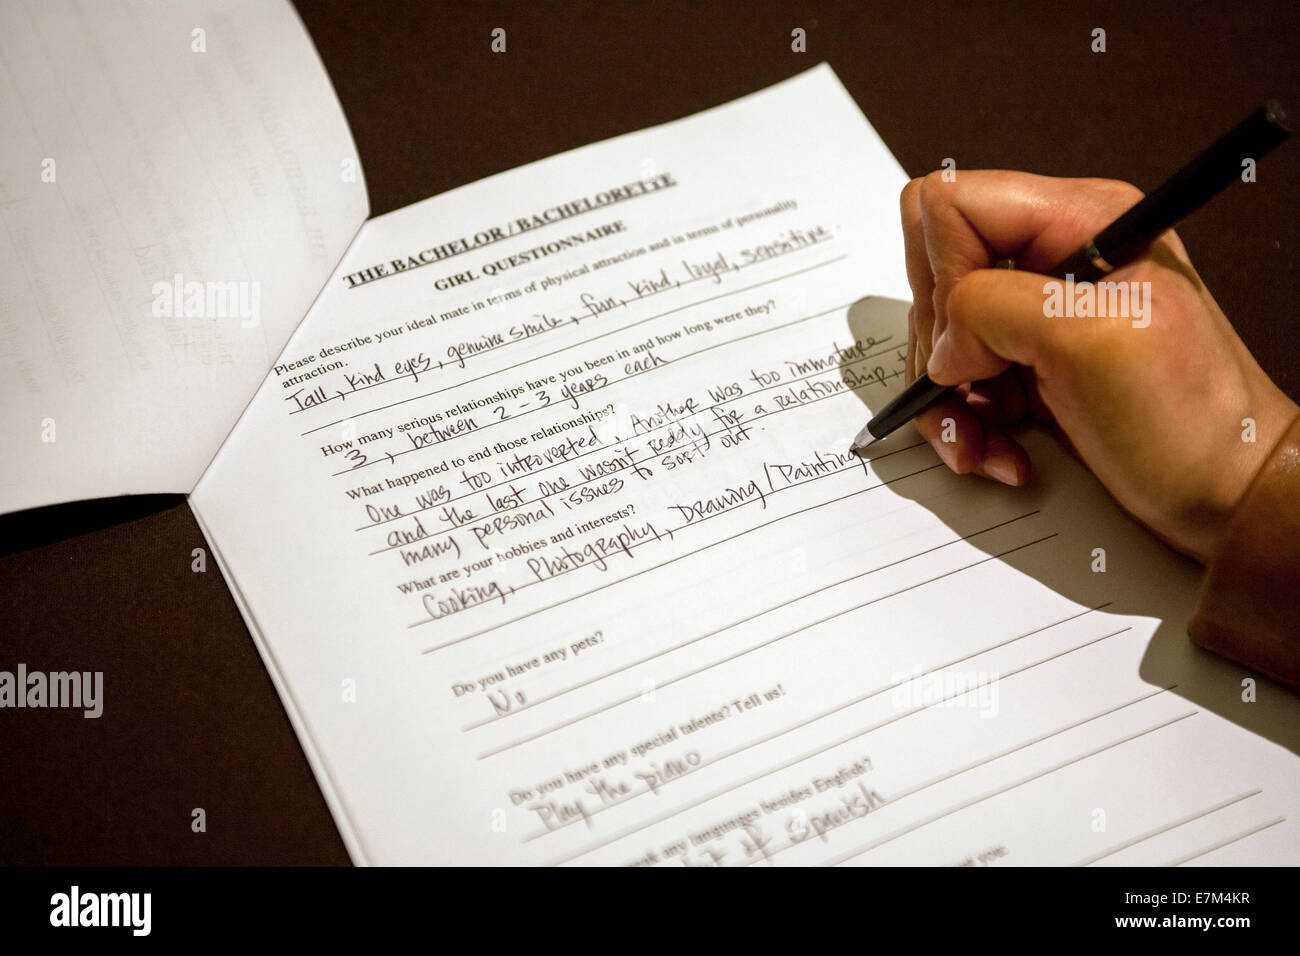 A 'Bachelor/Bachelorette' questionnaire asks about past relationships at a casting call in Costa Mesa, CA, for 'The Bachelor' TV show. Note question about hobbies. Stock Photo